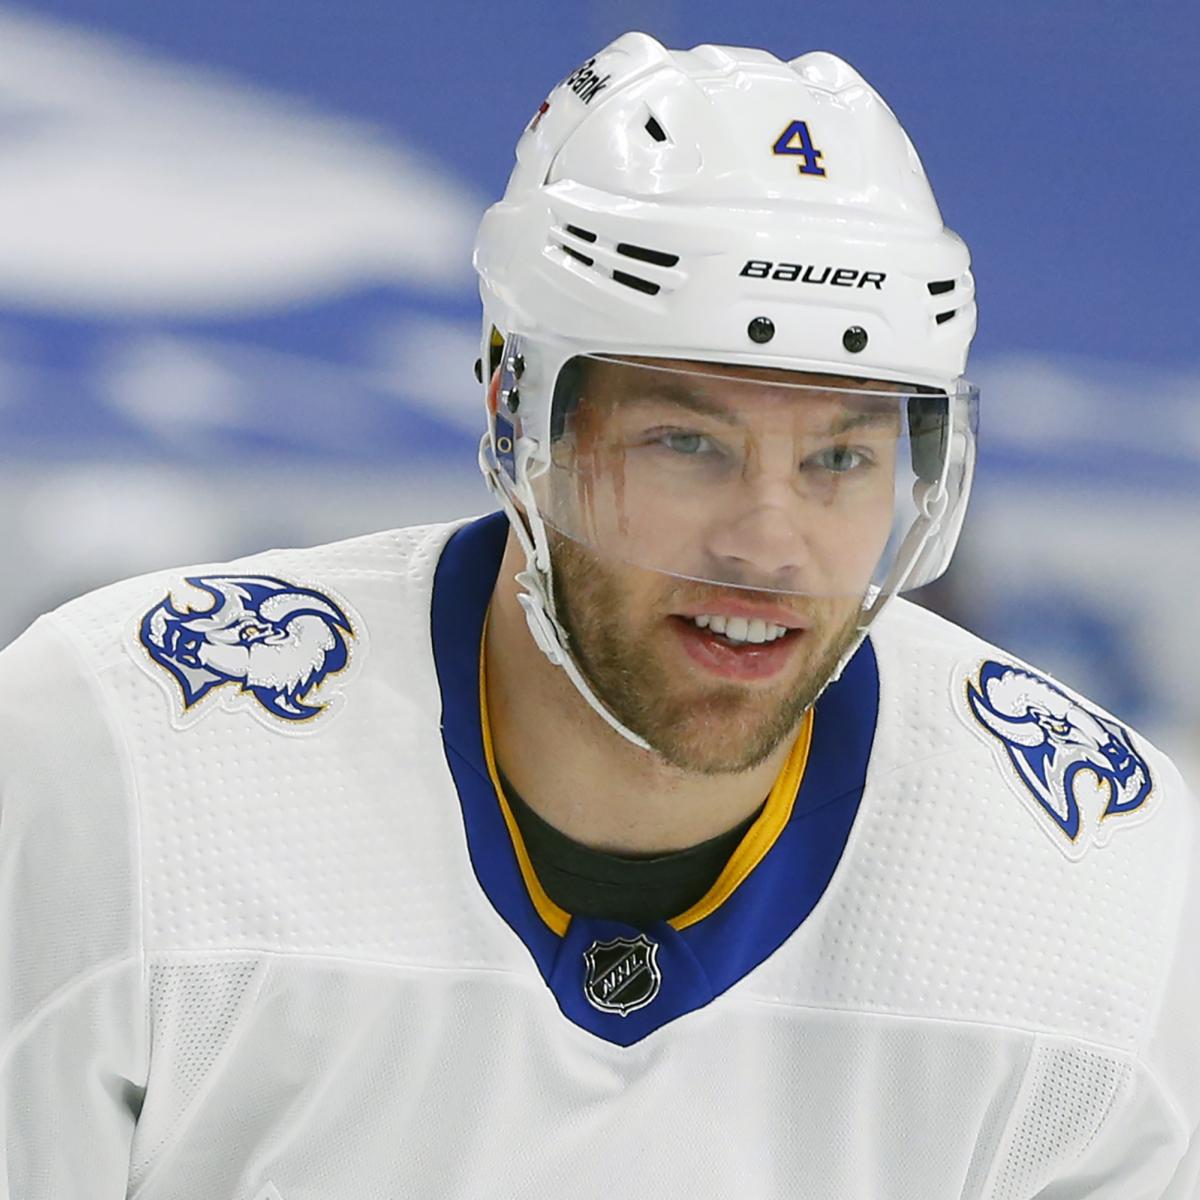 Anderson: 8 thoughts on Bruins trading Taylor Hall, and what's next